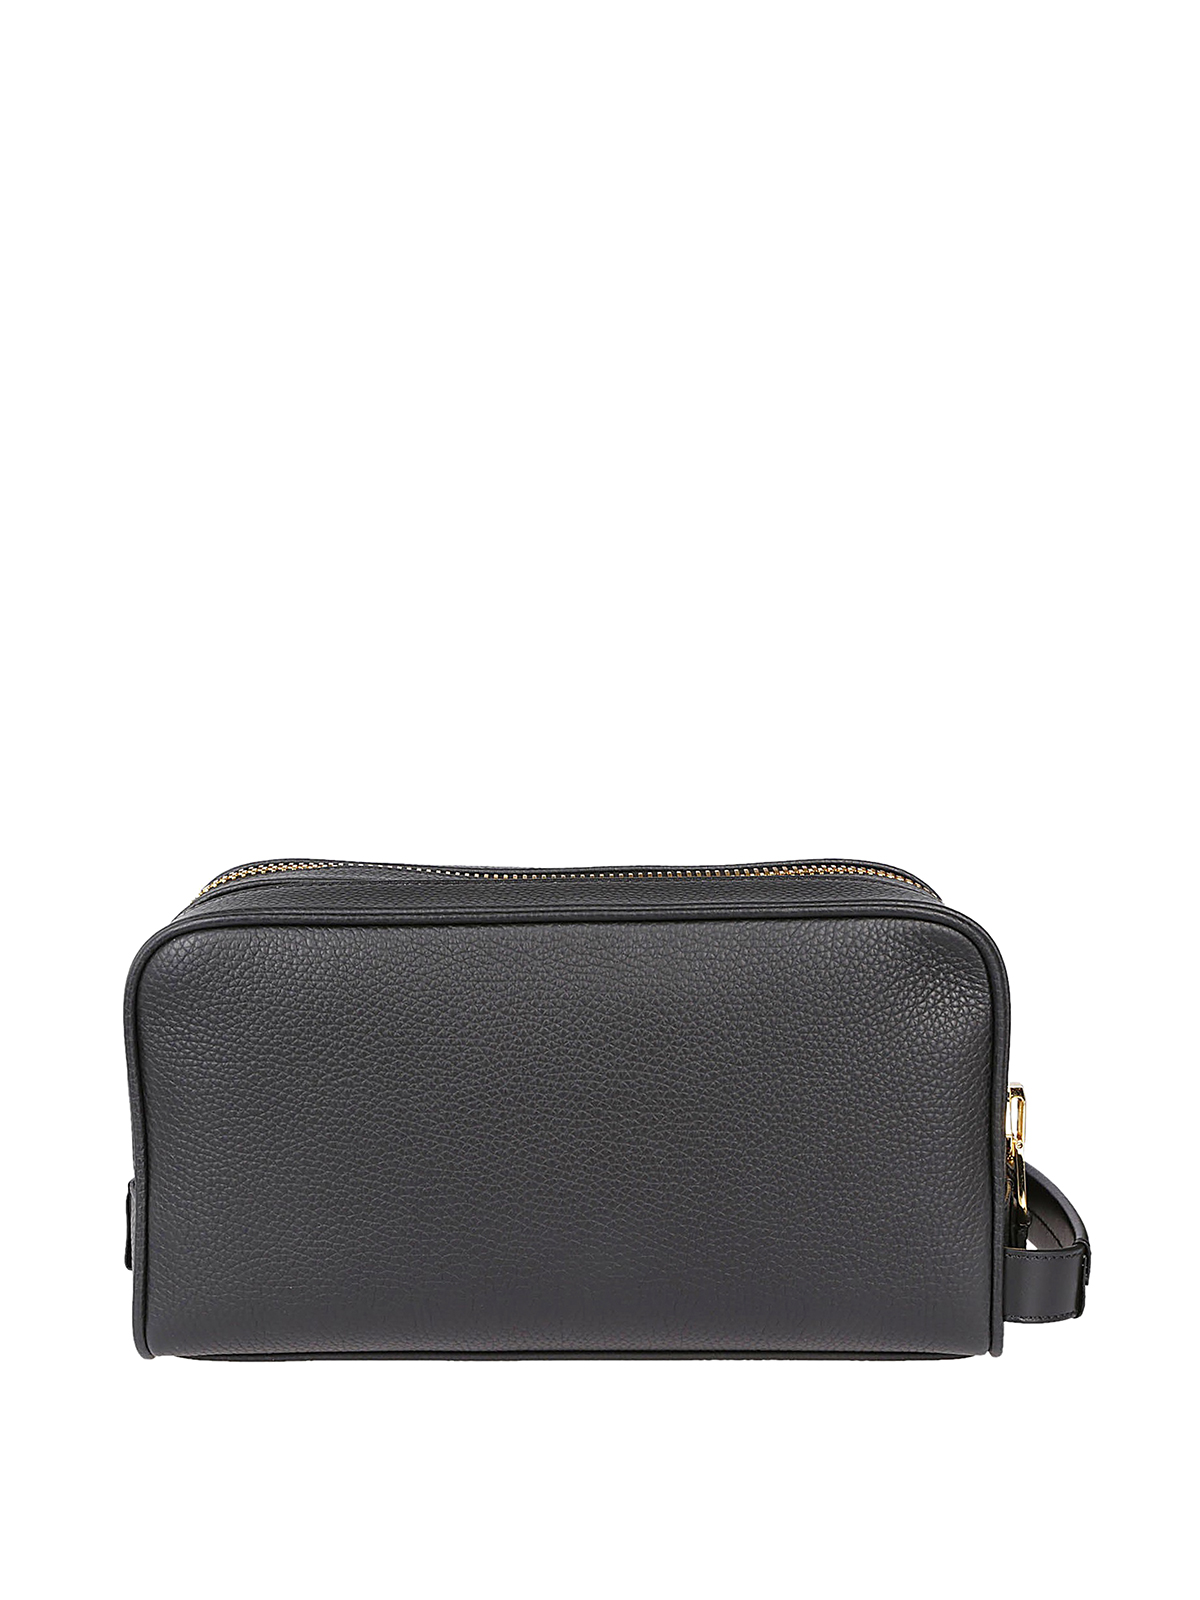 Cases & Covers Tom Ford - Dopp Kit black beauty case - Y0172TCP2BLK